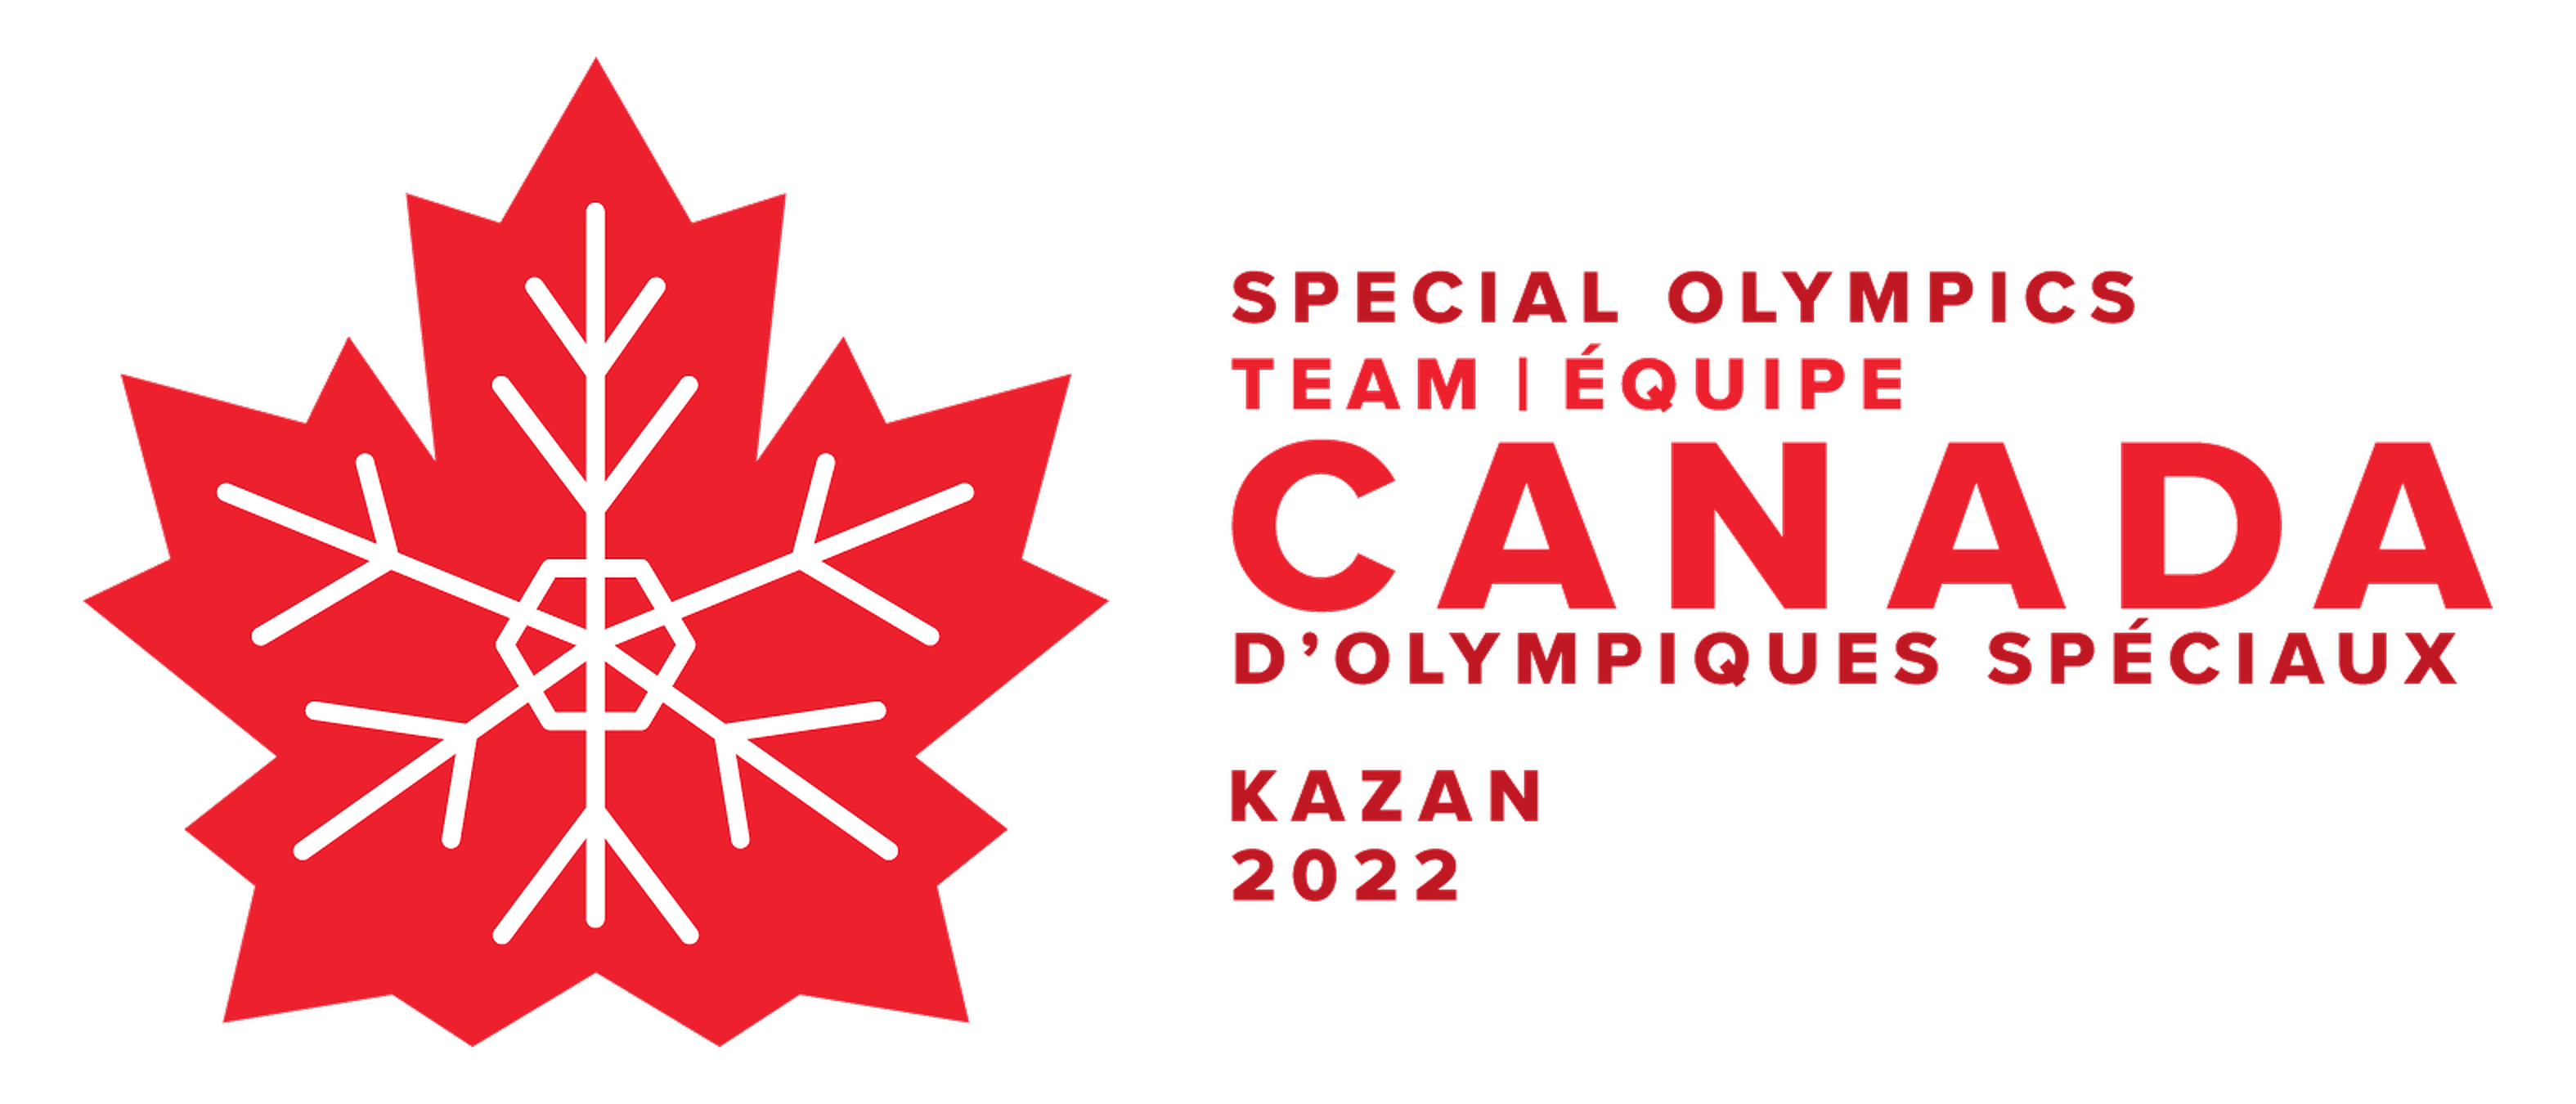 Newsletter Sign Up Special Olympics Canada